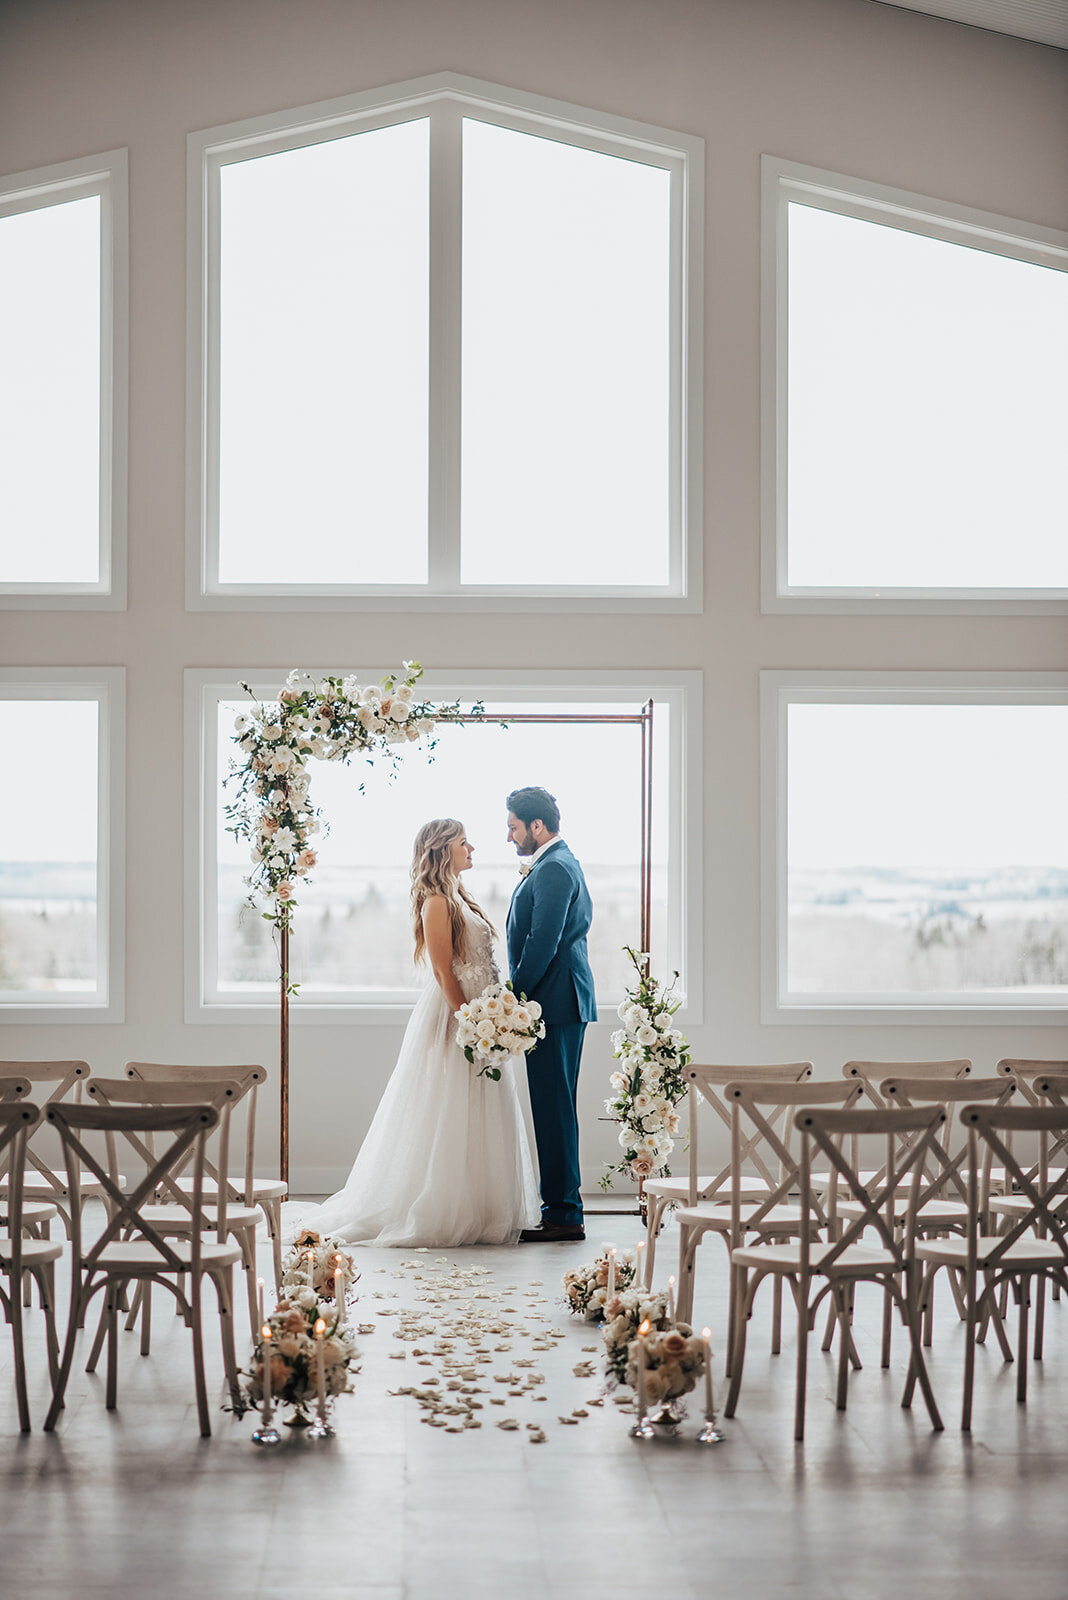 Stunning and romantic indoor ceremony at Tin Roof Event Centre, a modern wedding venue in Lacombe, Alberta, featured on the Brontë Bride Vendor Guide.